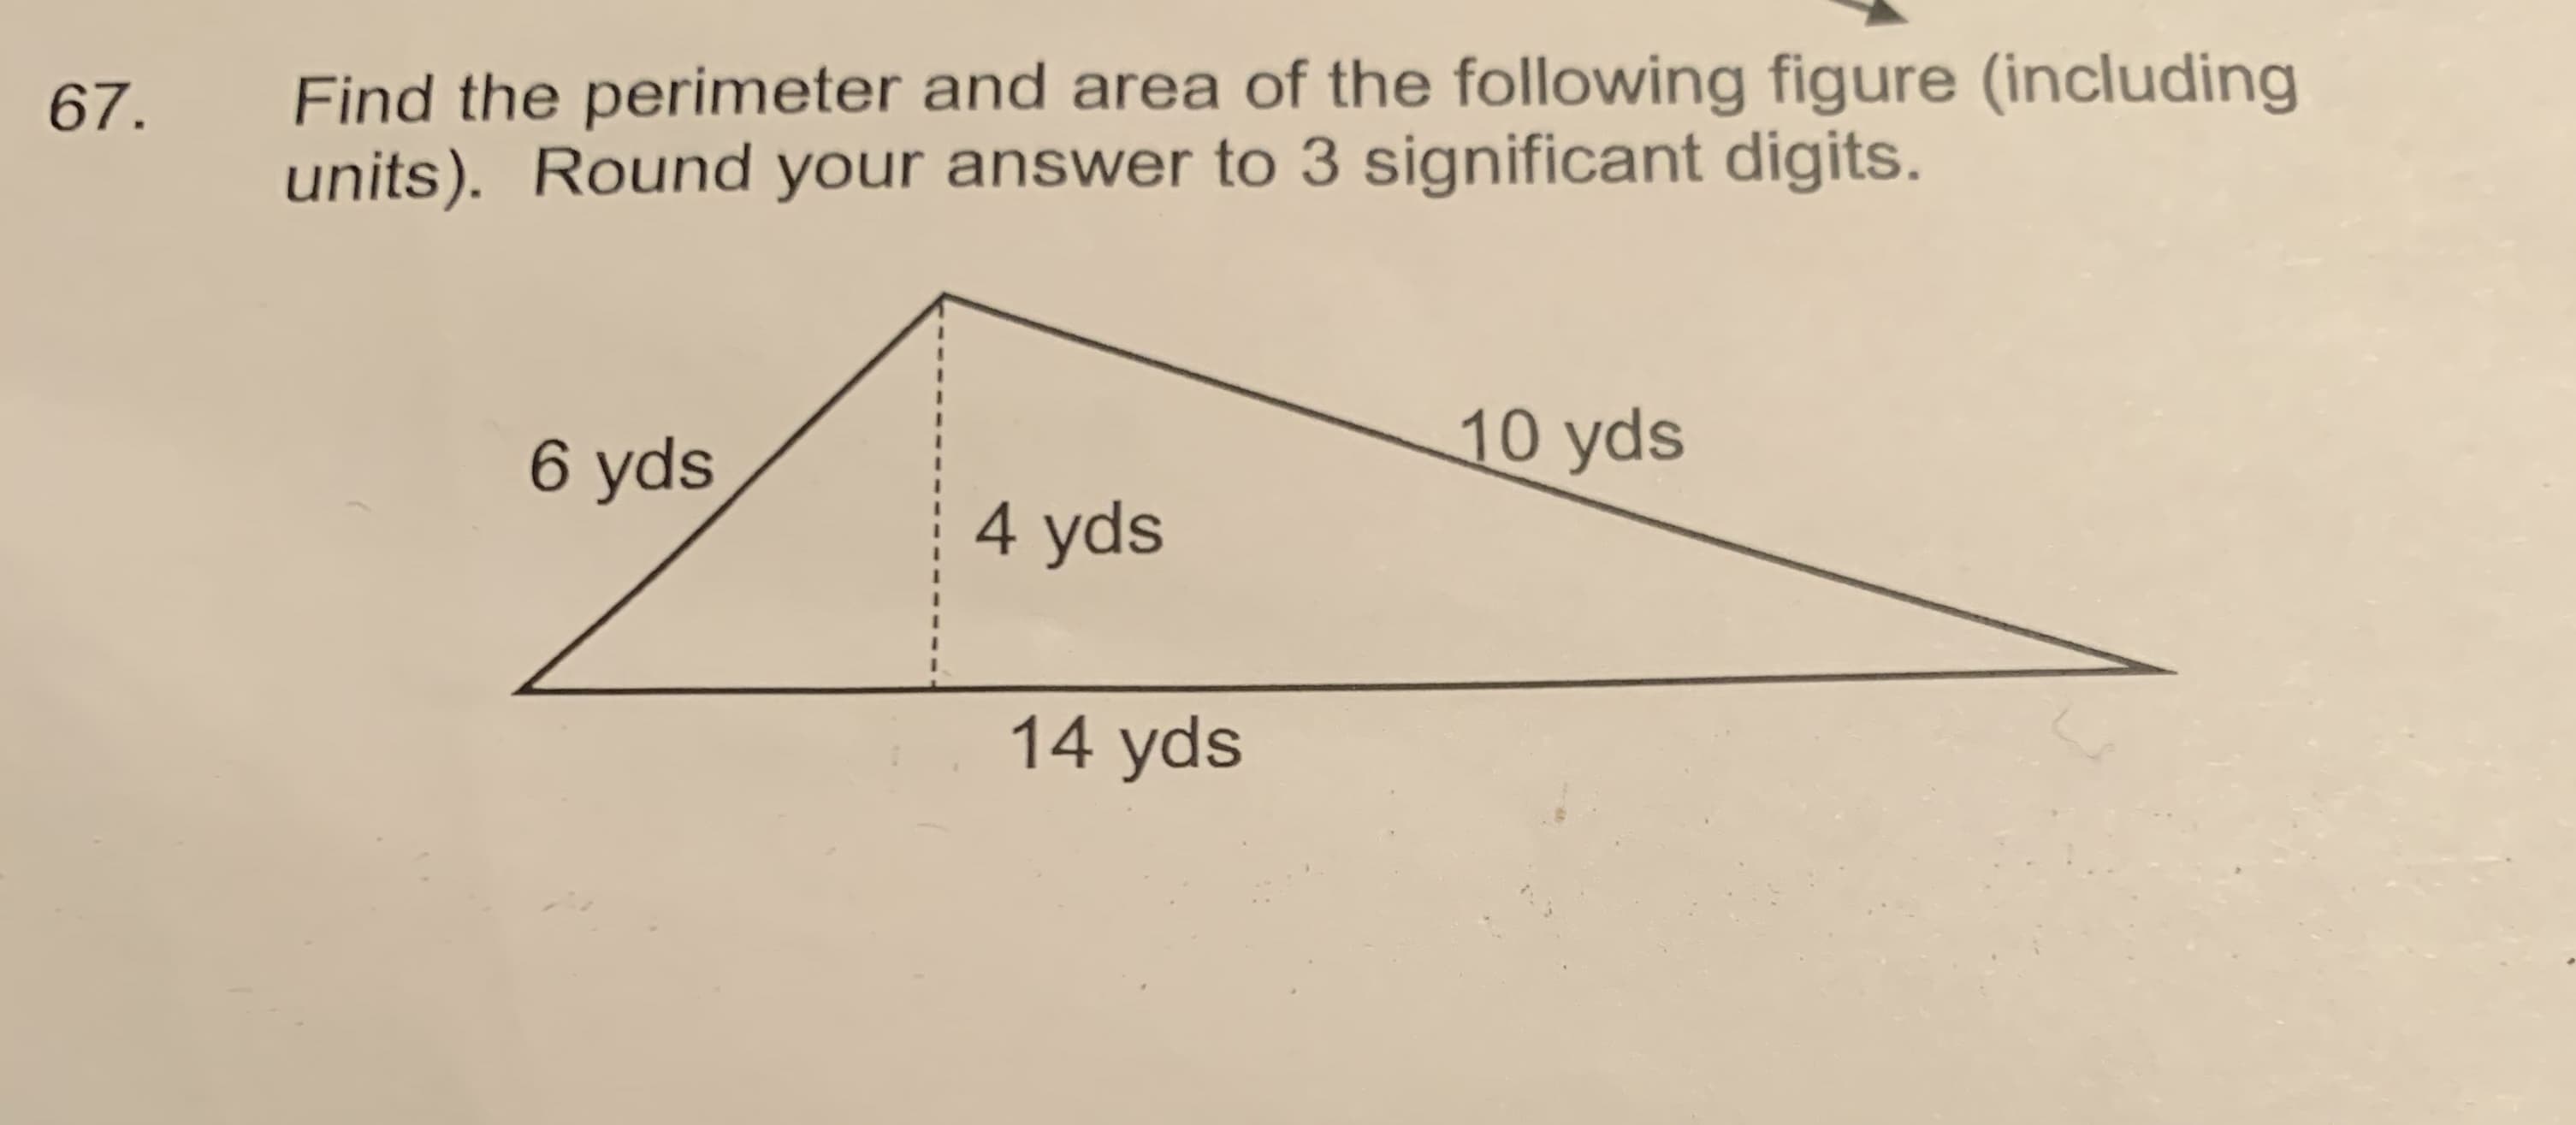 Find the perimeter and area of the following figure (including
units). Round your answer to 3 significant digits.
67.
10 yds
6 yds
4 yds
14 yds
